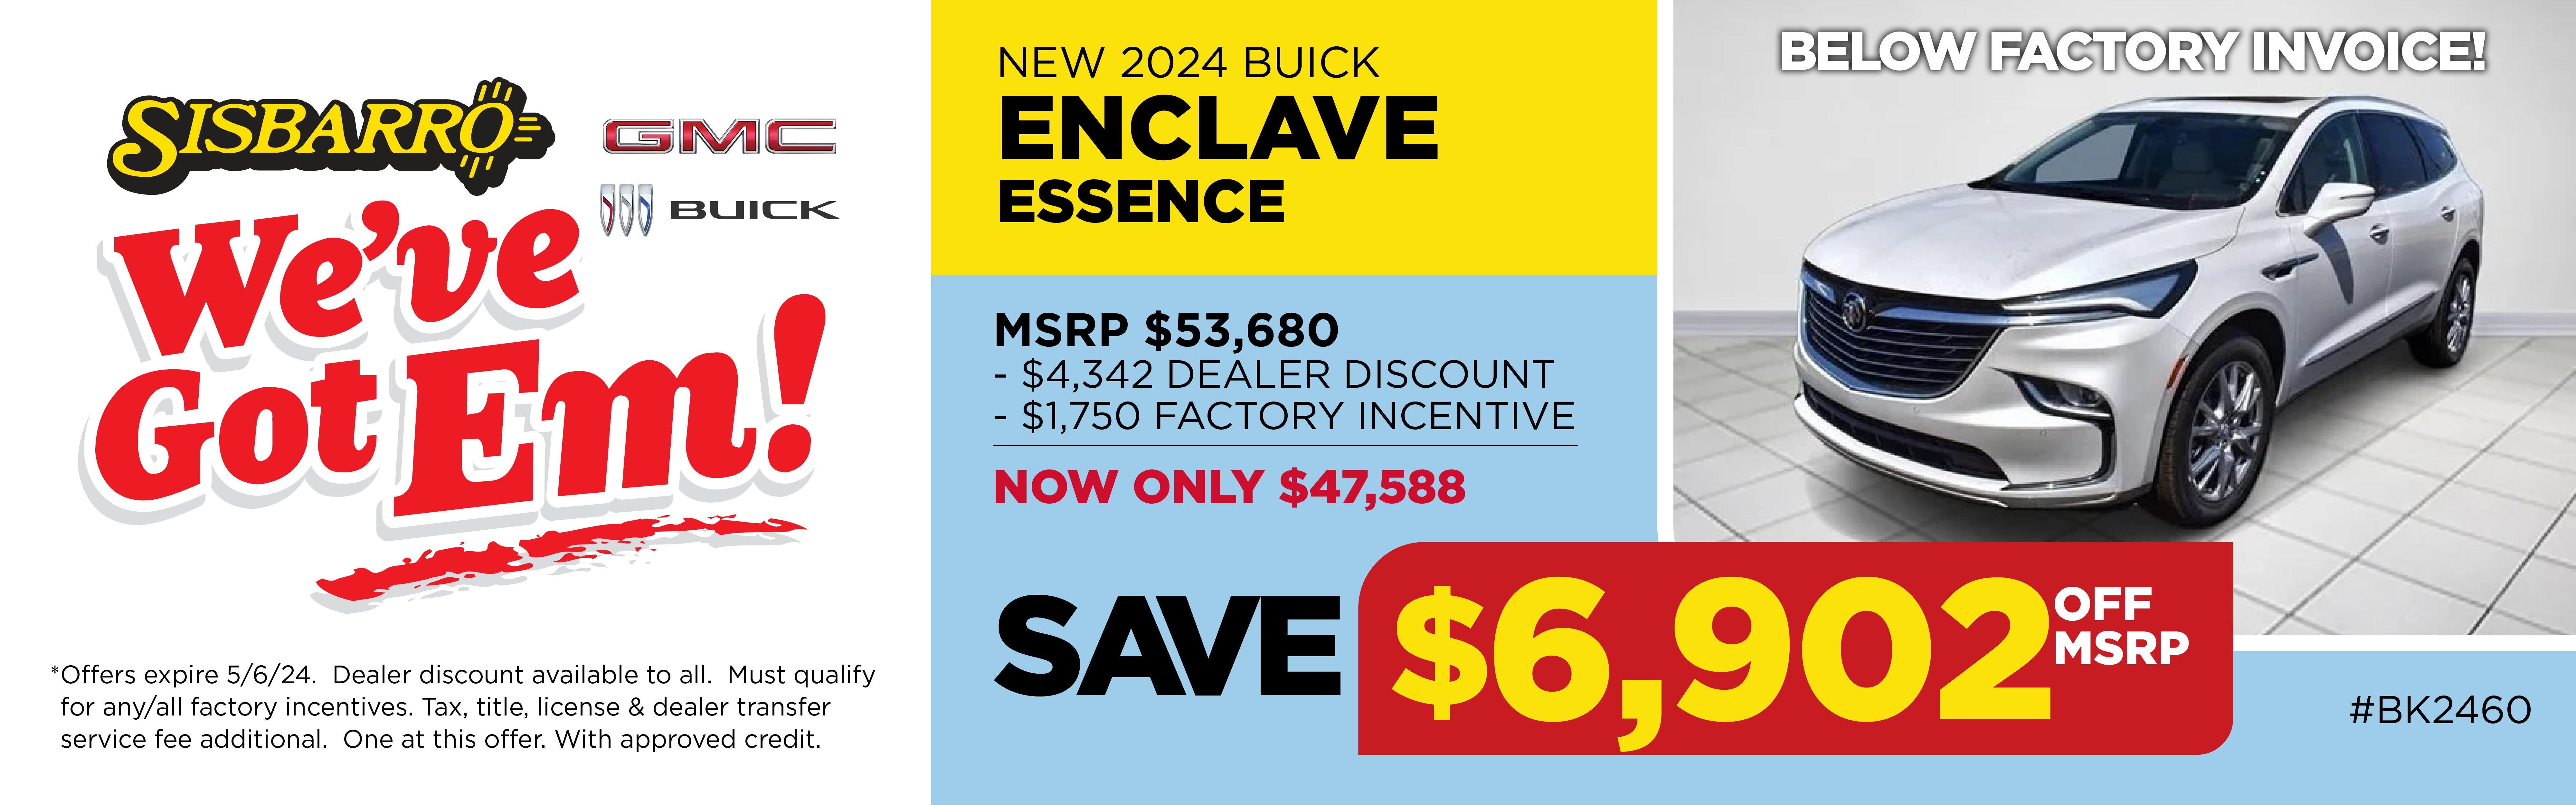 New 2024 Buick Enclave Essence